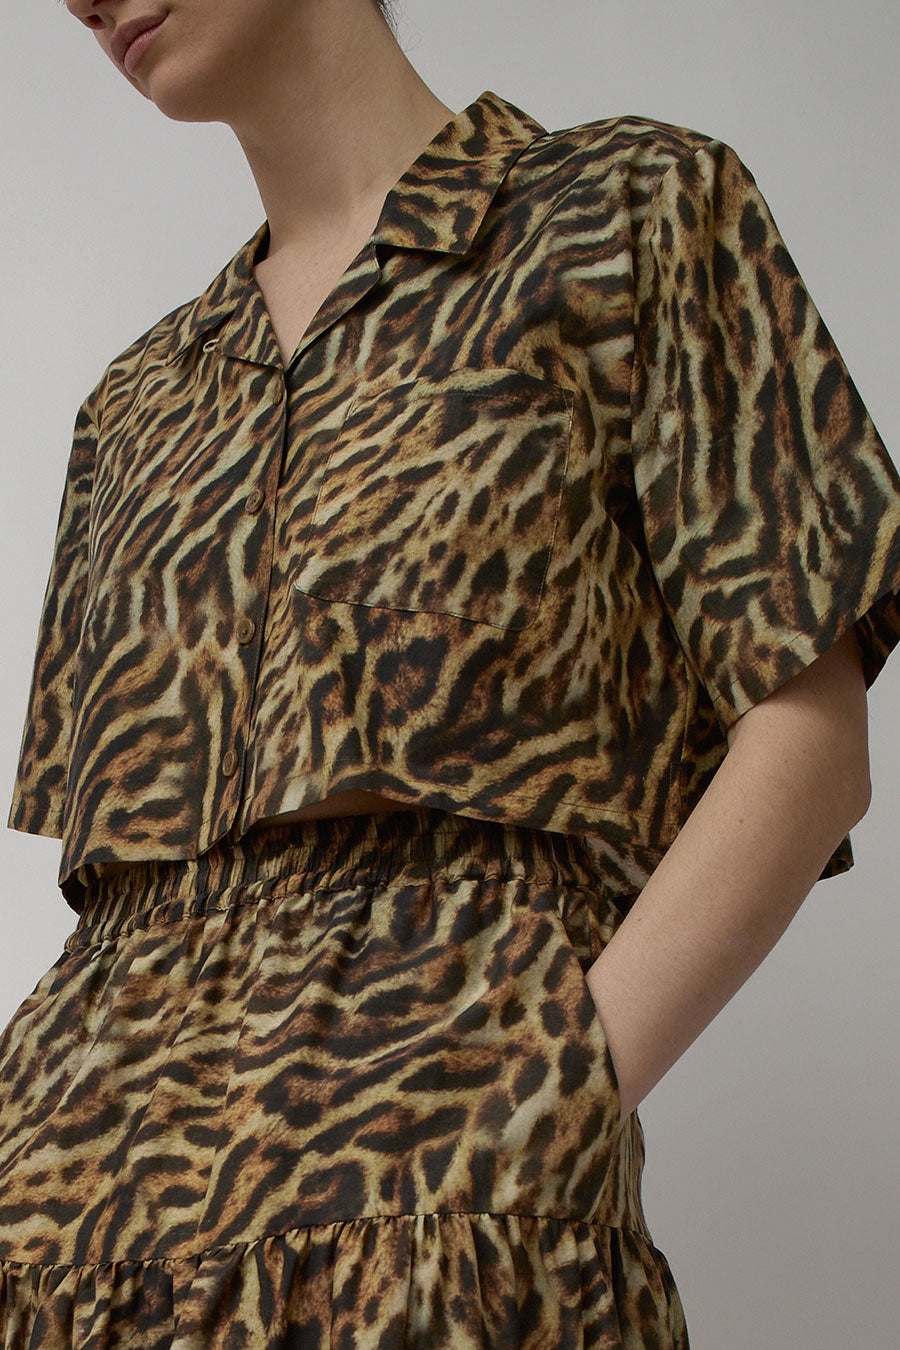 Silk Laundry Cotton Silk Cropped Camp Shirt in Leopard